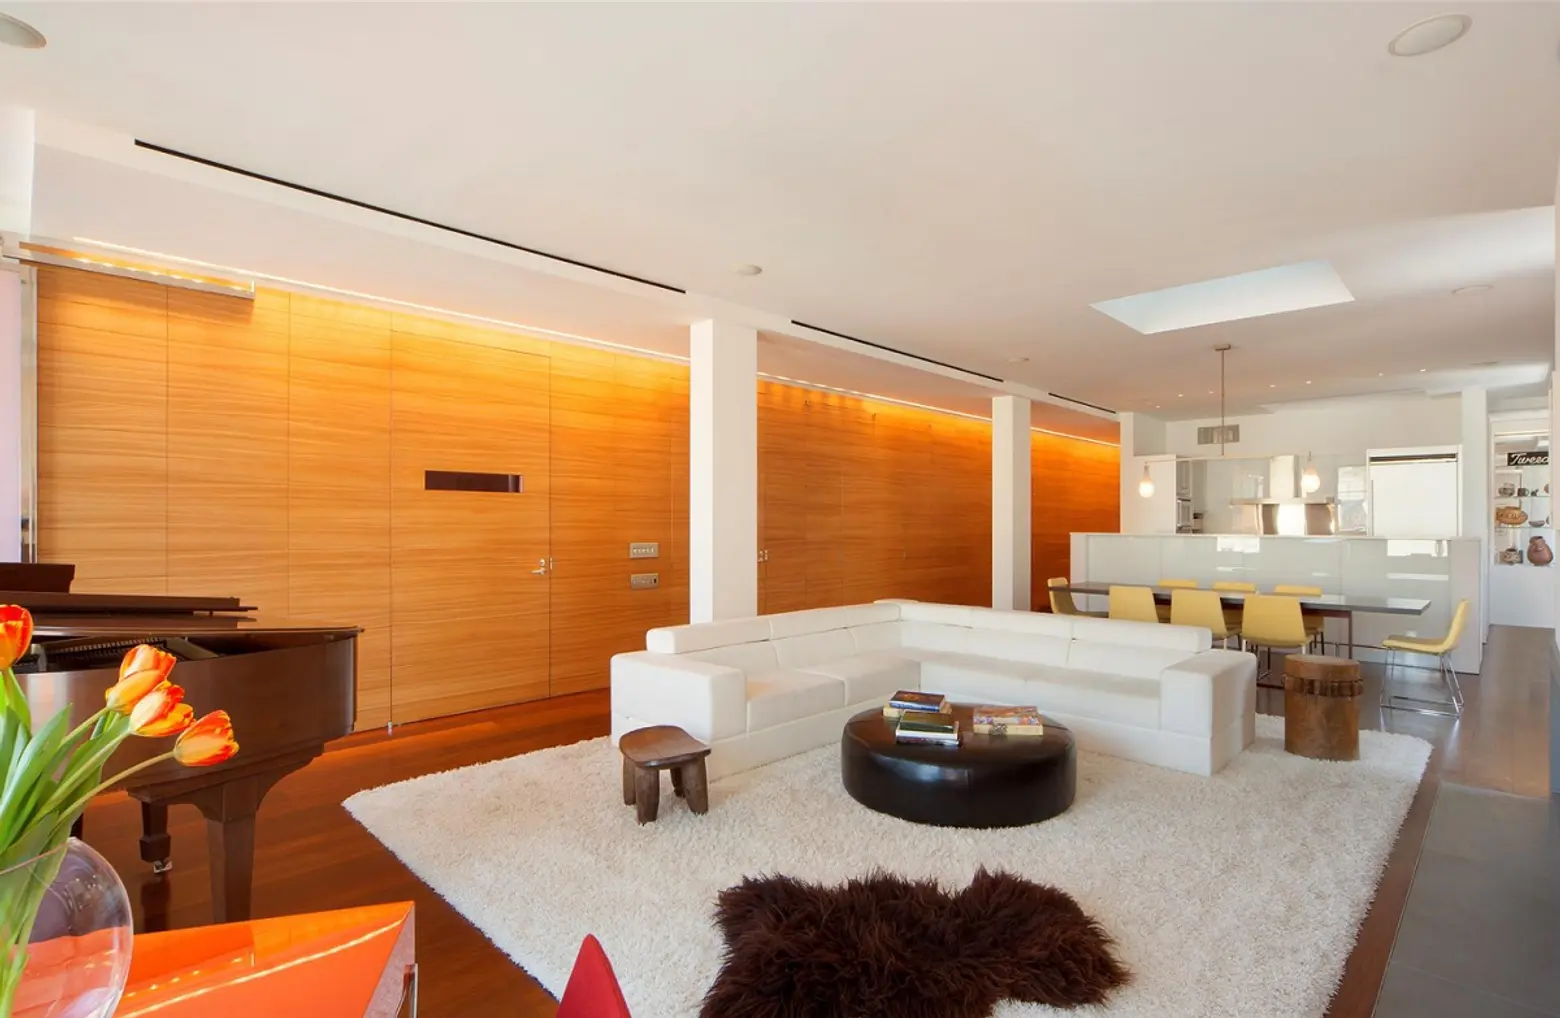 Rubbermaid VP Snatches Up Patrick Naggar-Designed Chelsea Penthouse for $7 Million